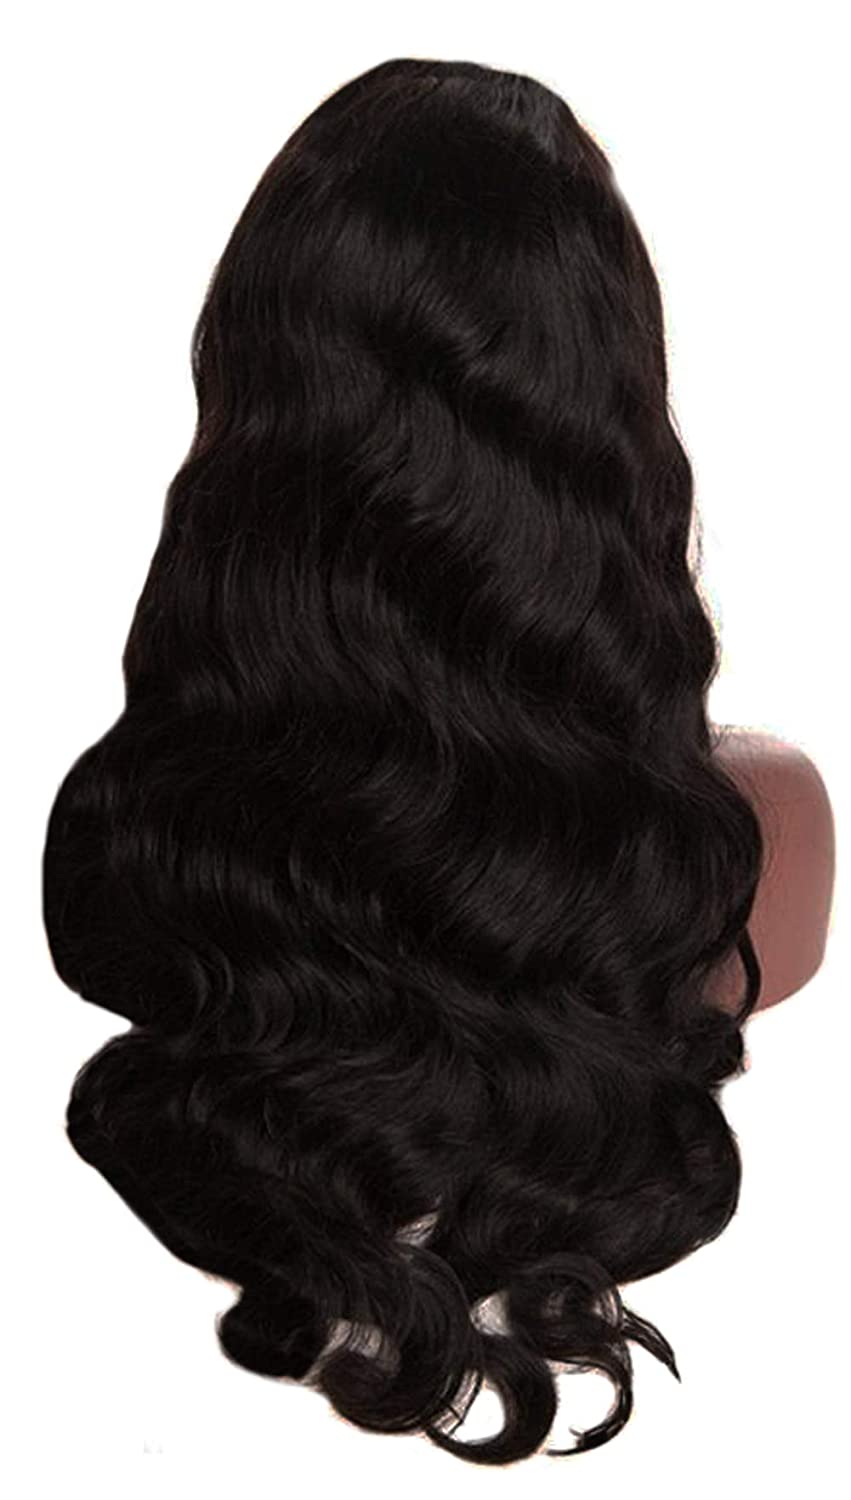 Lush Locks  Lace Wigs Remy Human Hair Pre Plucked with Baby Hair Body Wave Lace Wigs Natural Color